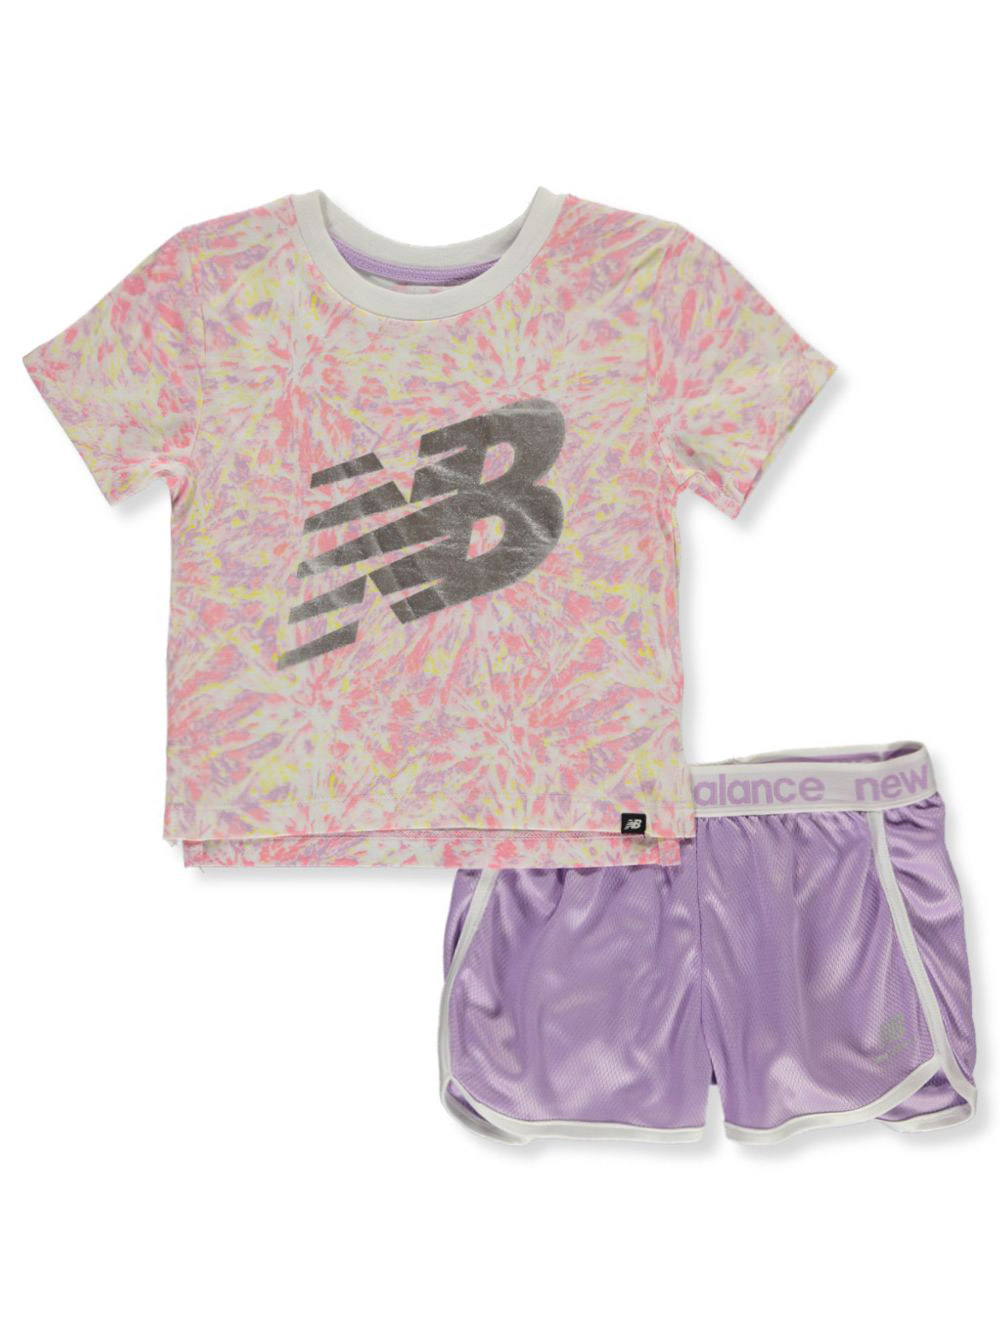 Girls' 2-Piece Shorts Set Outfit